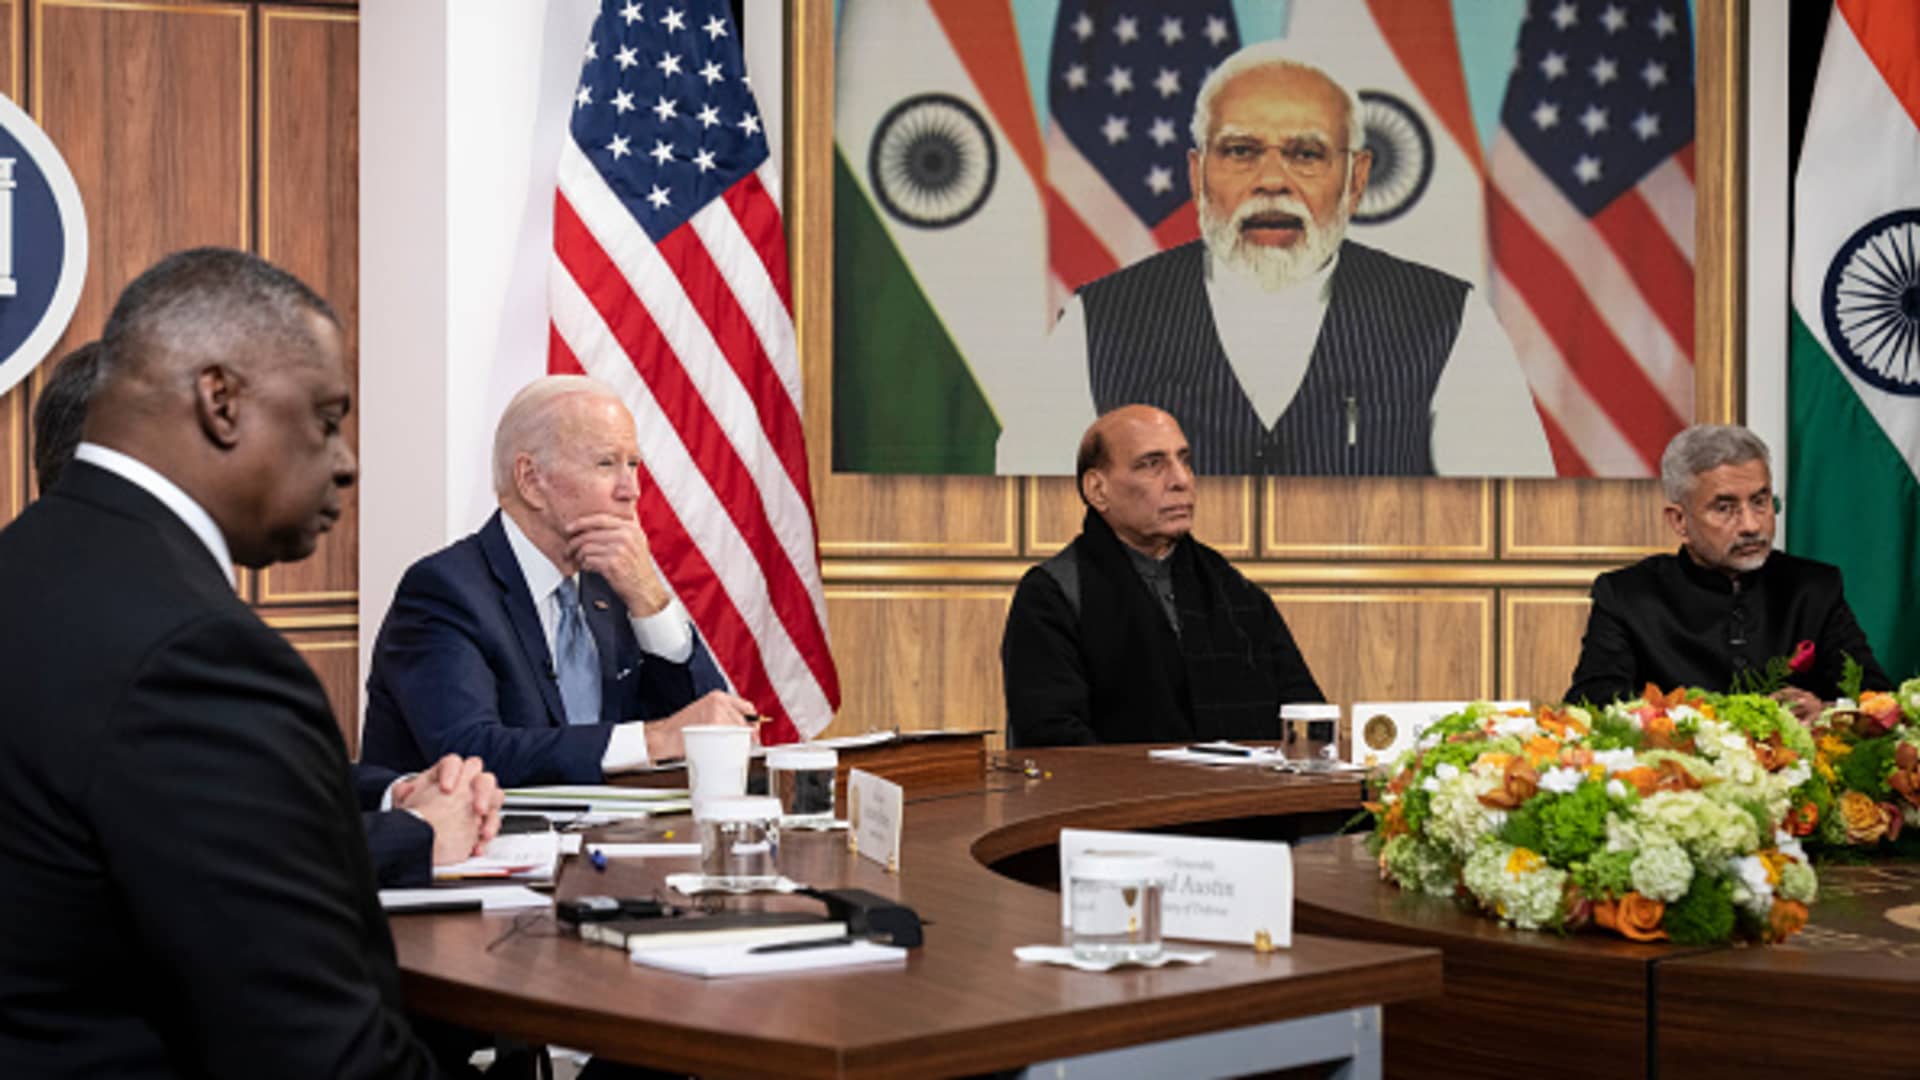 (L-R) U.S. Defense Secretary Lloyd Austin, U.S. President Joe Biden, Indian Minister of Defense Rajnath Singh, and Indian Foreign Minister Subrahmanyam Jaishankar listen as Prime Minister of India Narendra Modi (on screen) speaks during a virtual meeting in the South Court Auditorium of the White House complex April 11, 2022 in Washington, DC. India has maintained a neutral stance so far in Russias invasion of Ukraine.